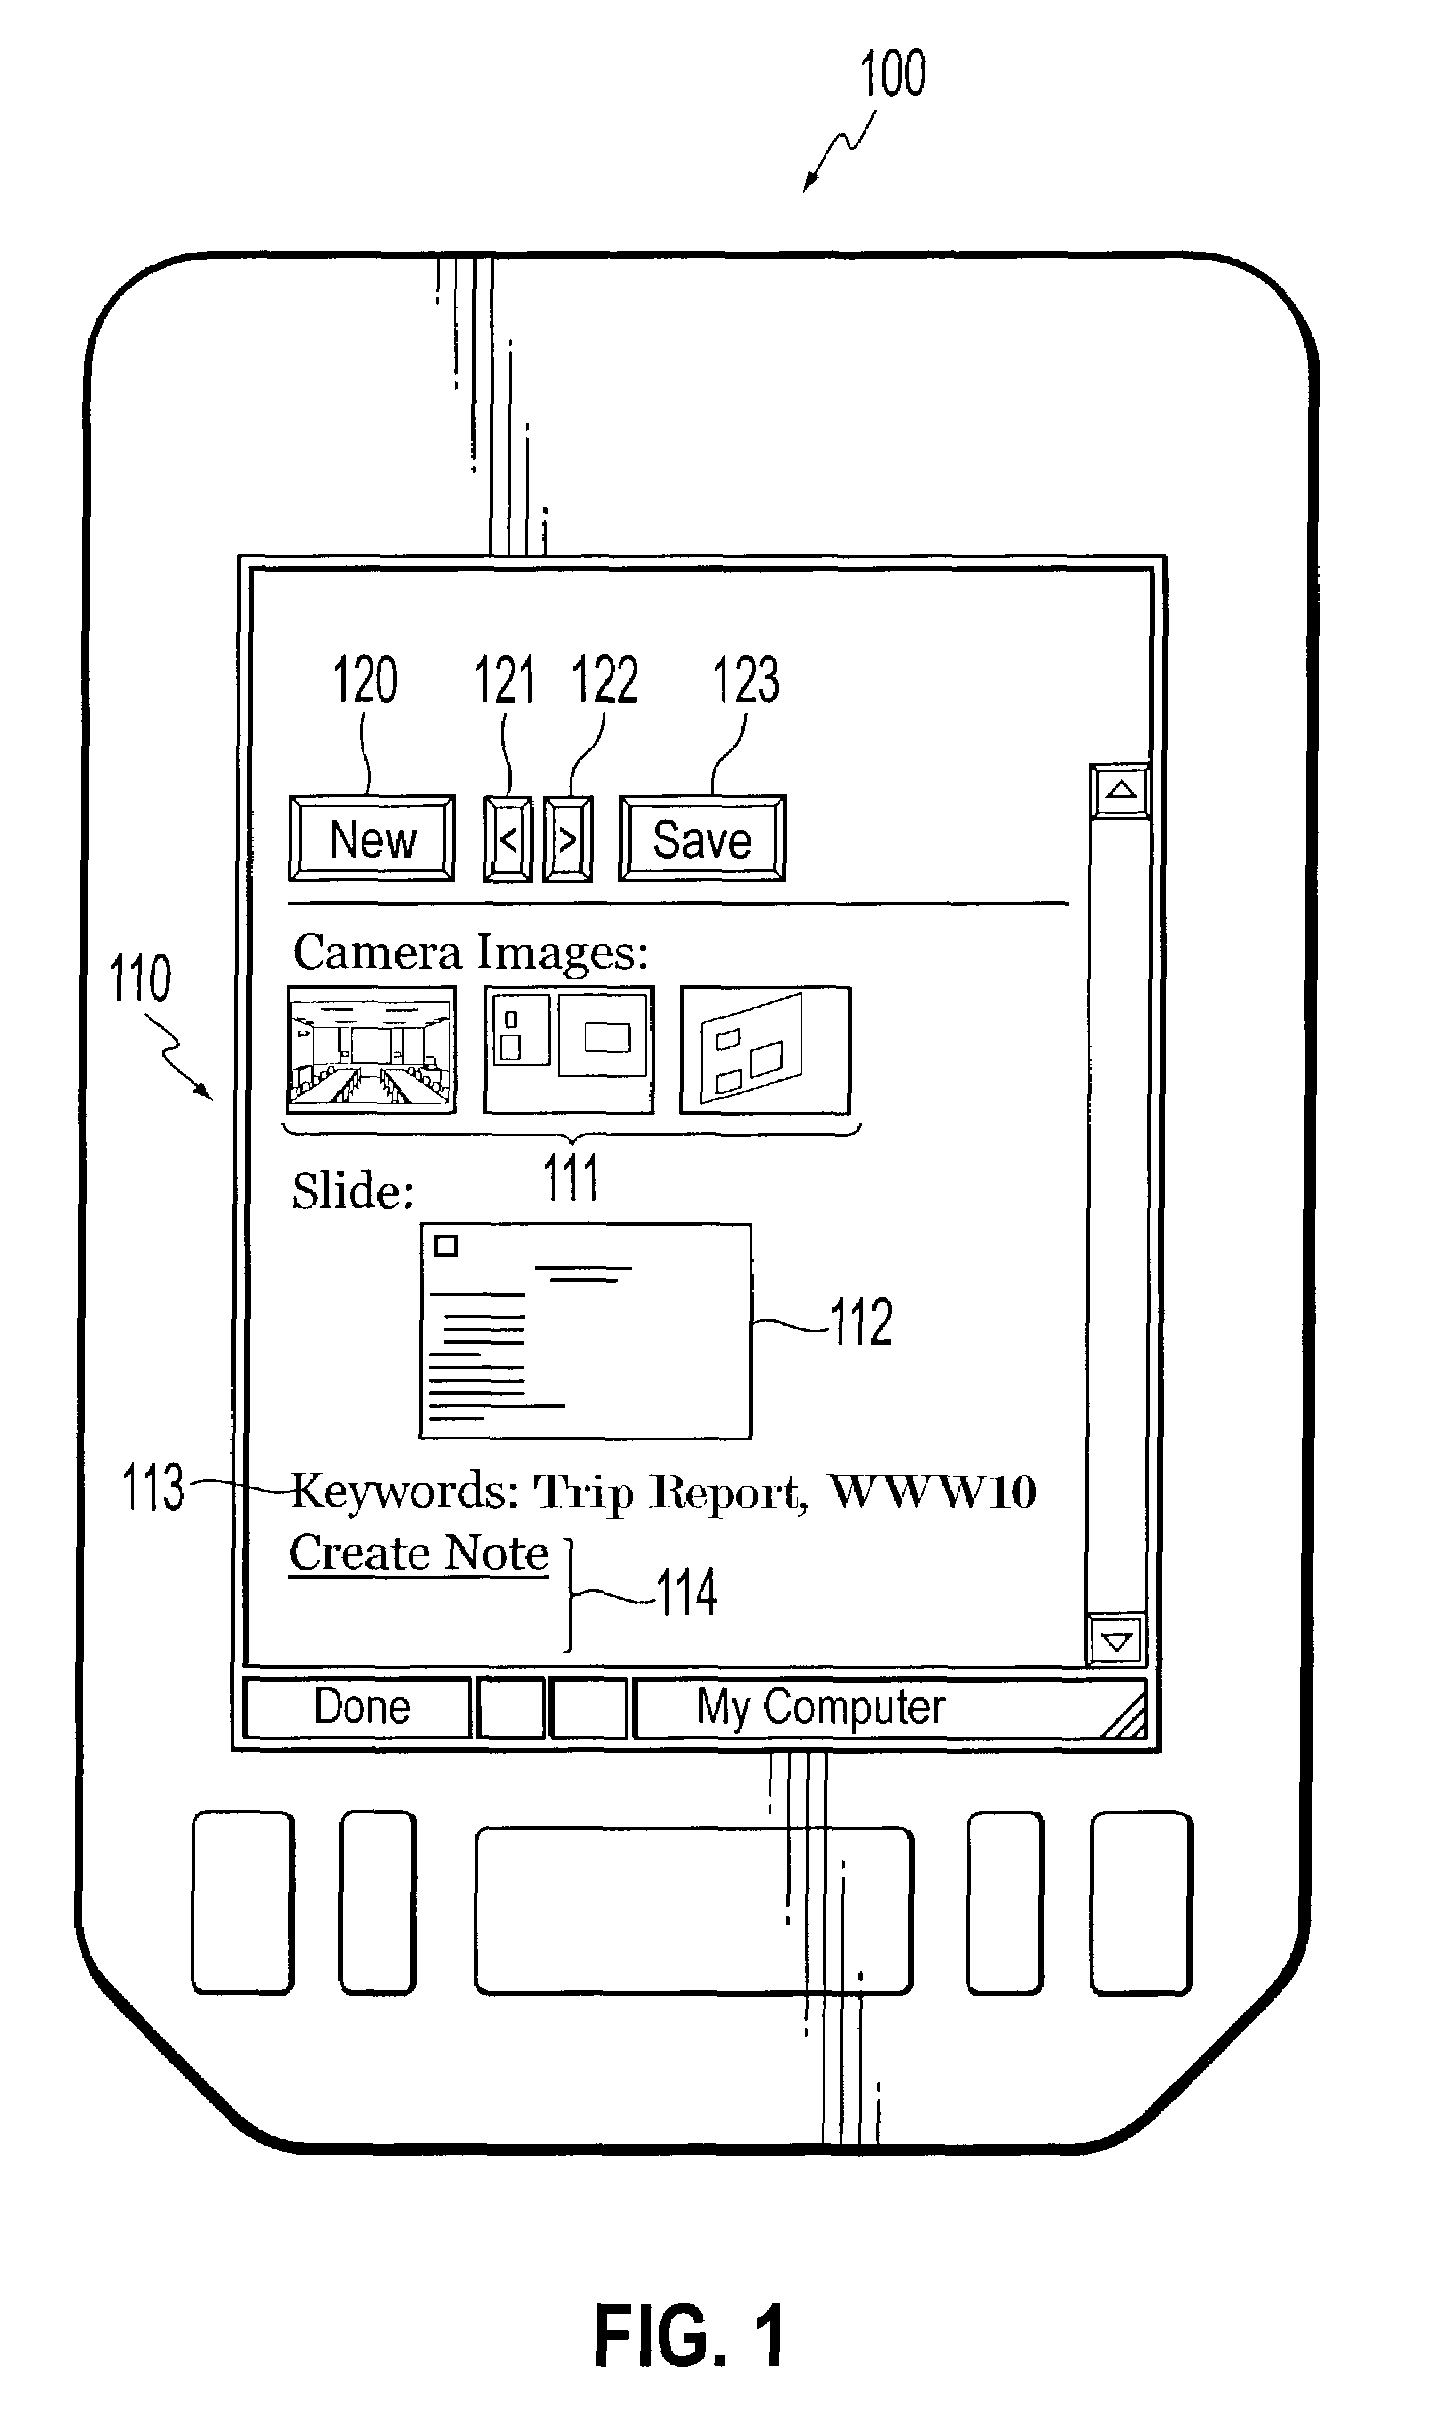 Systems and methods for bookmarking live and recorded multimedia documents